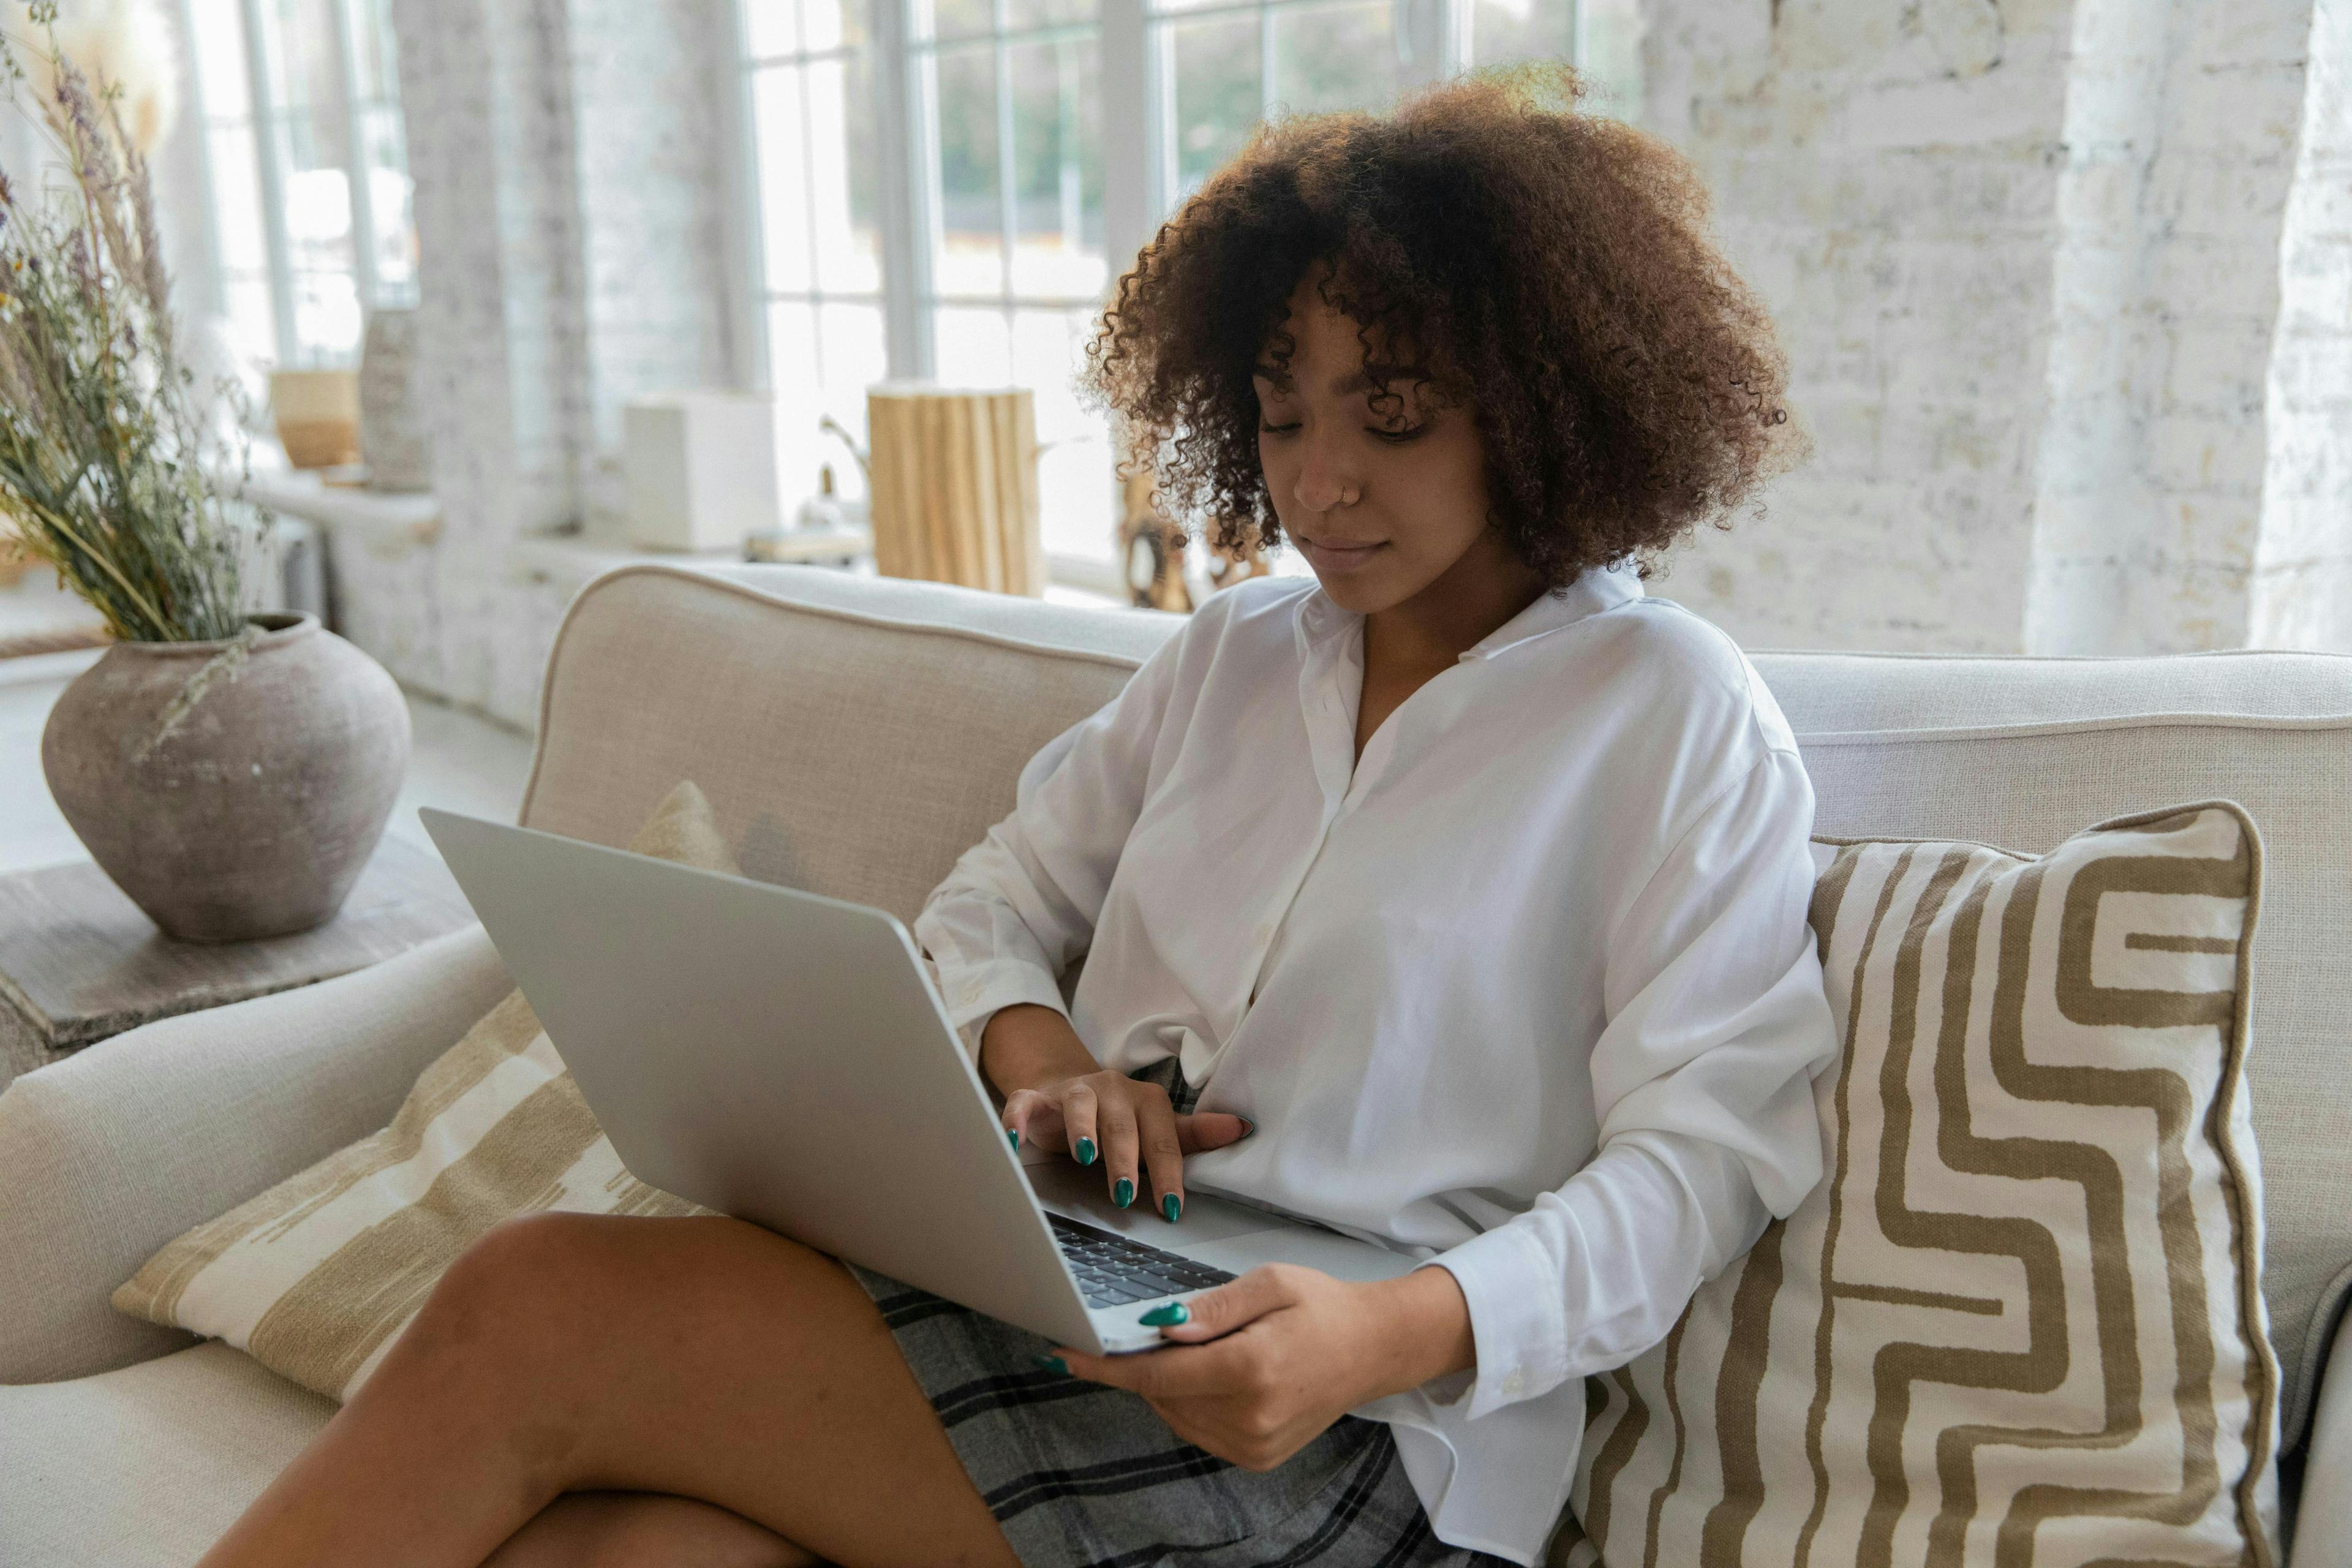  a person sitting on a light-colored sofa, working on a laptop in a bright, airy living space. This comfortable setting is ideal for researching or engaging with "lead generation companies" to boost business opportunities.